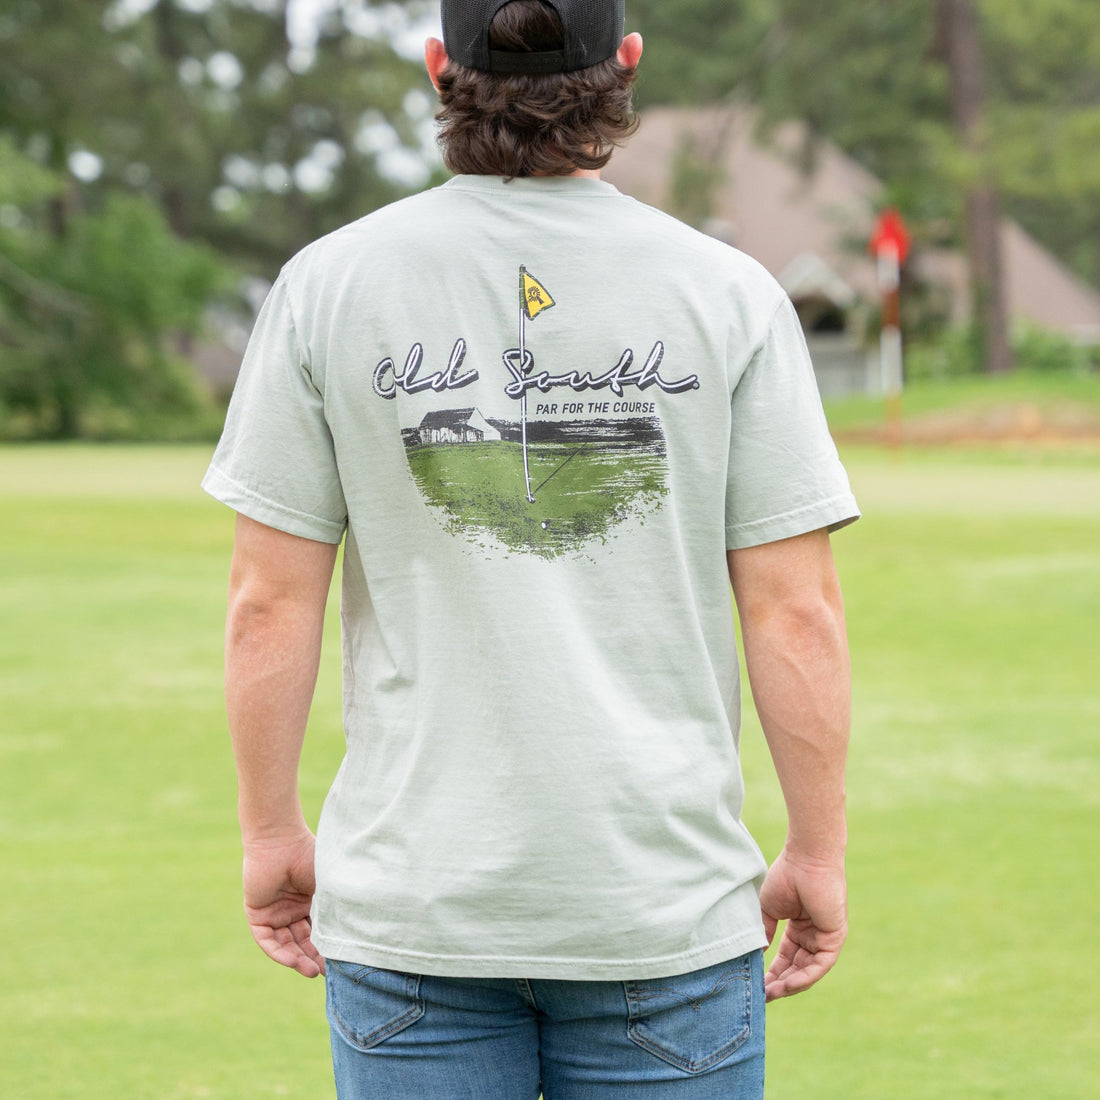 Par for the Course Short Sleeve Tee by Old South